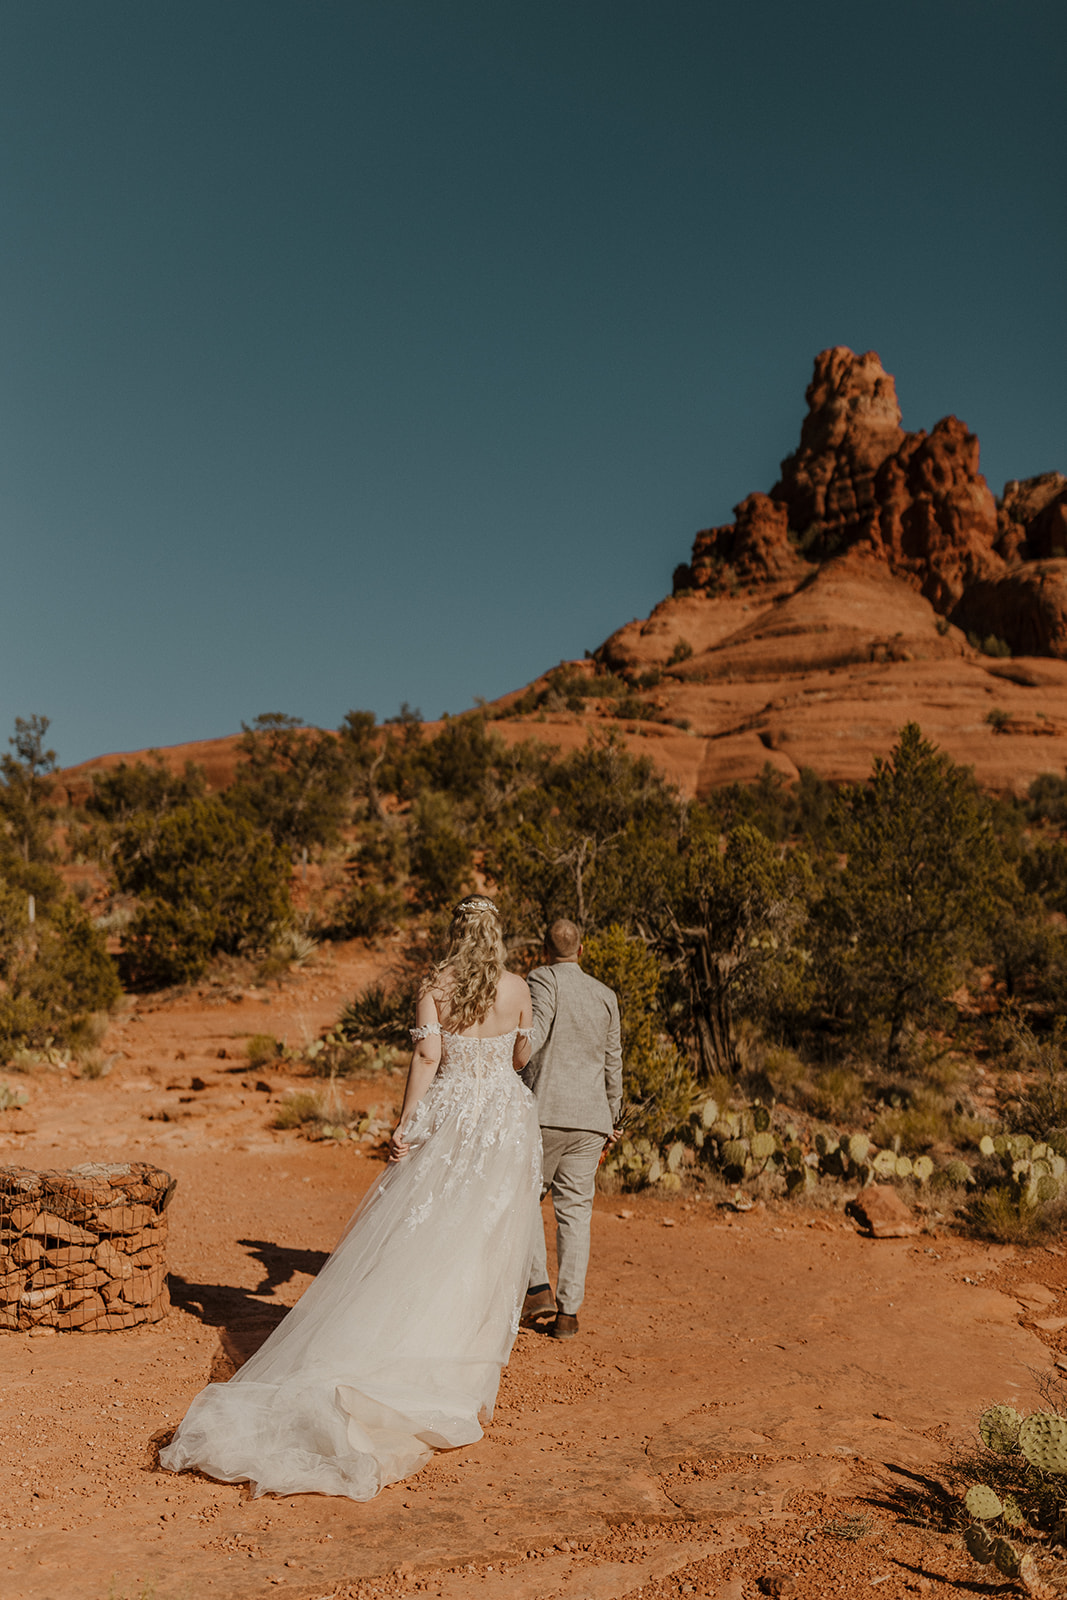 stunning bride and groom pose together in one of the best desert locations to elope in Arizona!